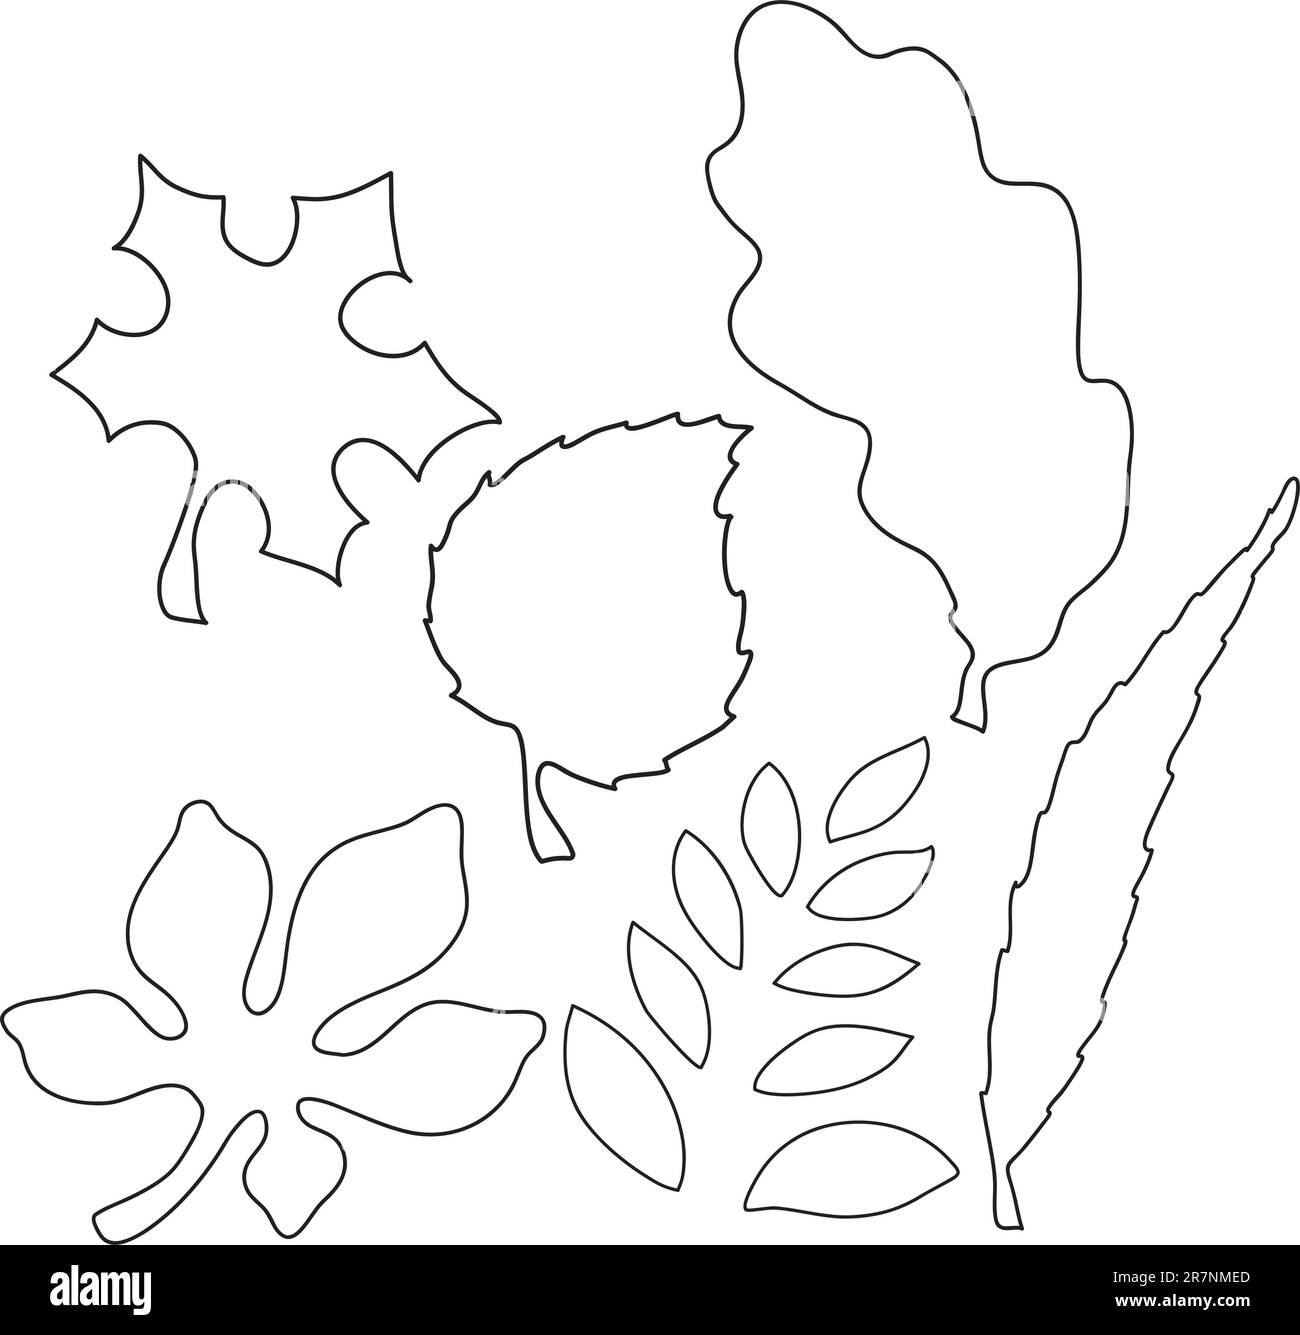 Vector illustration of different types of leaves on a white background Stock Vector